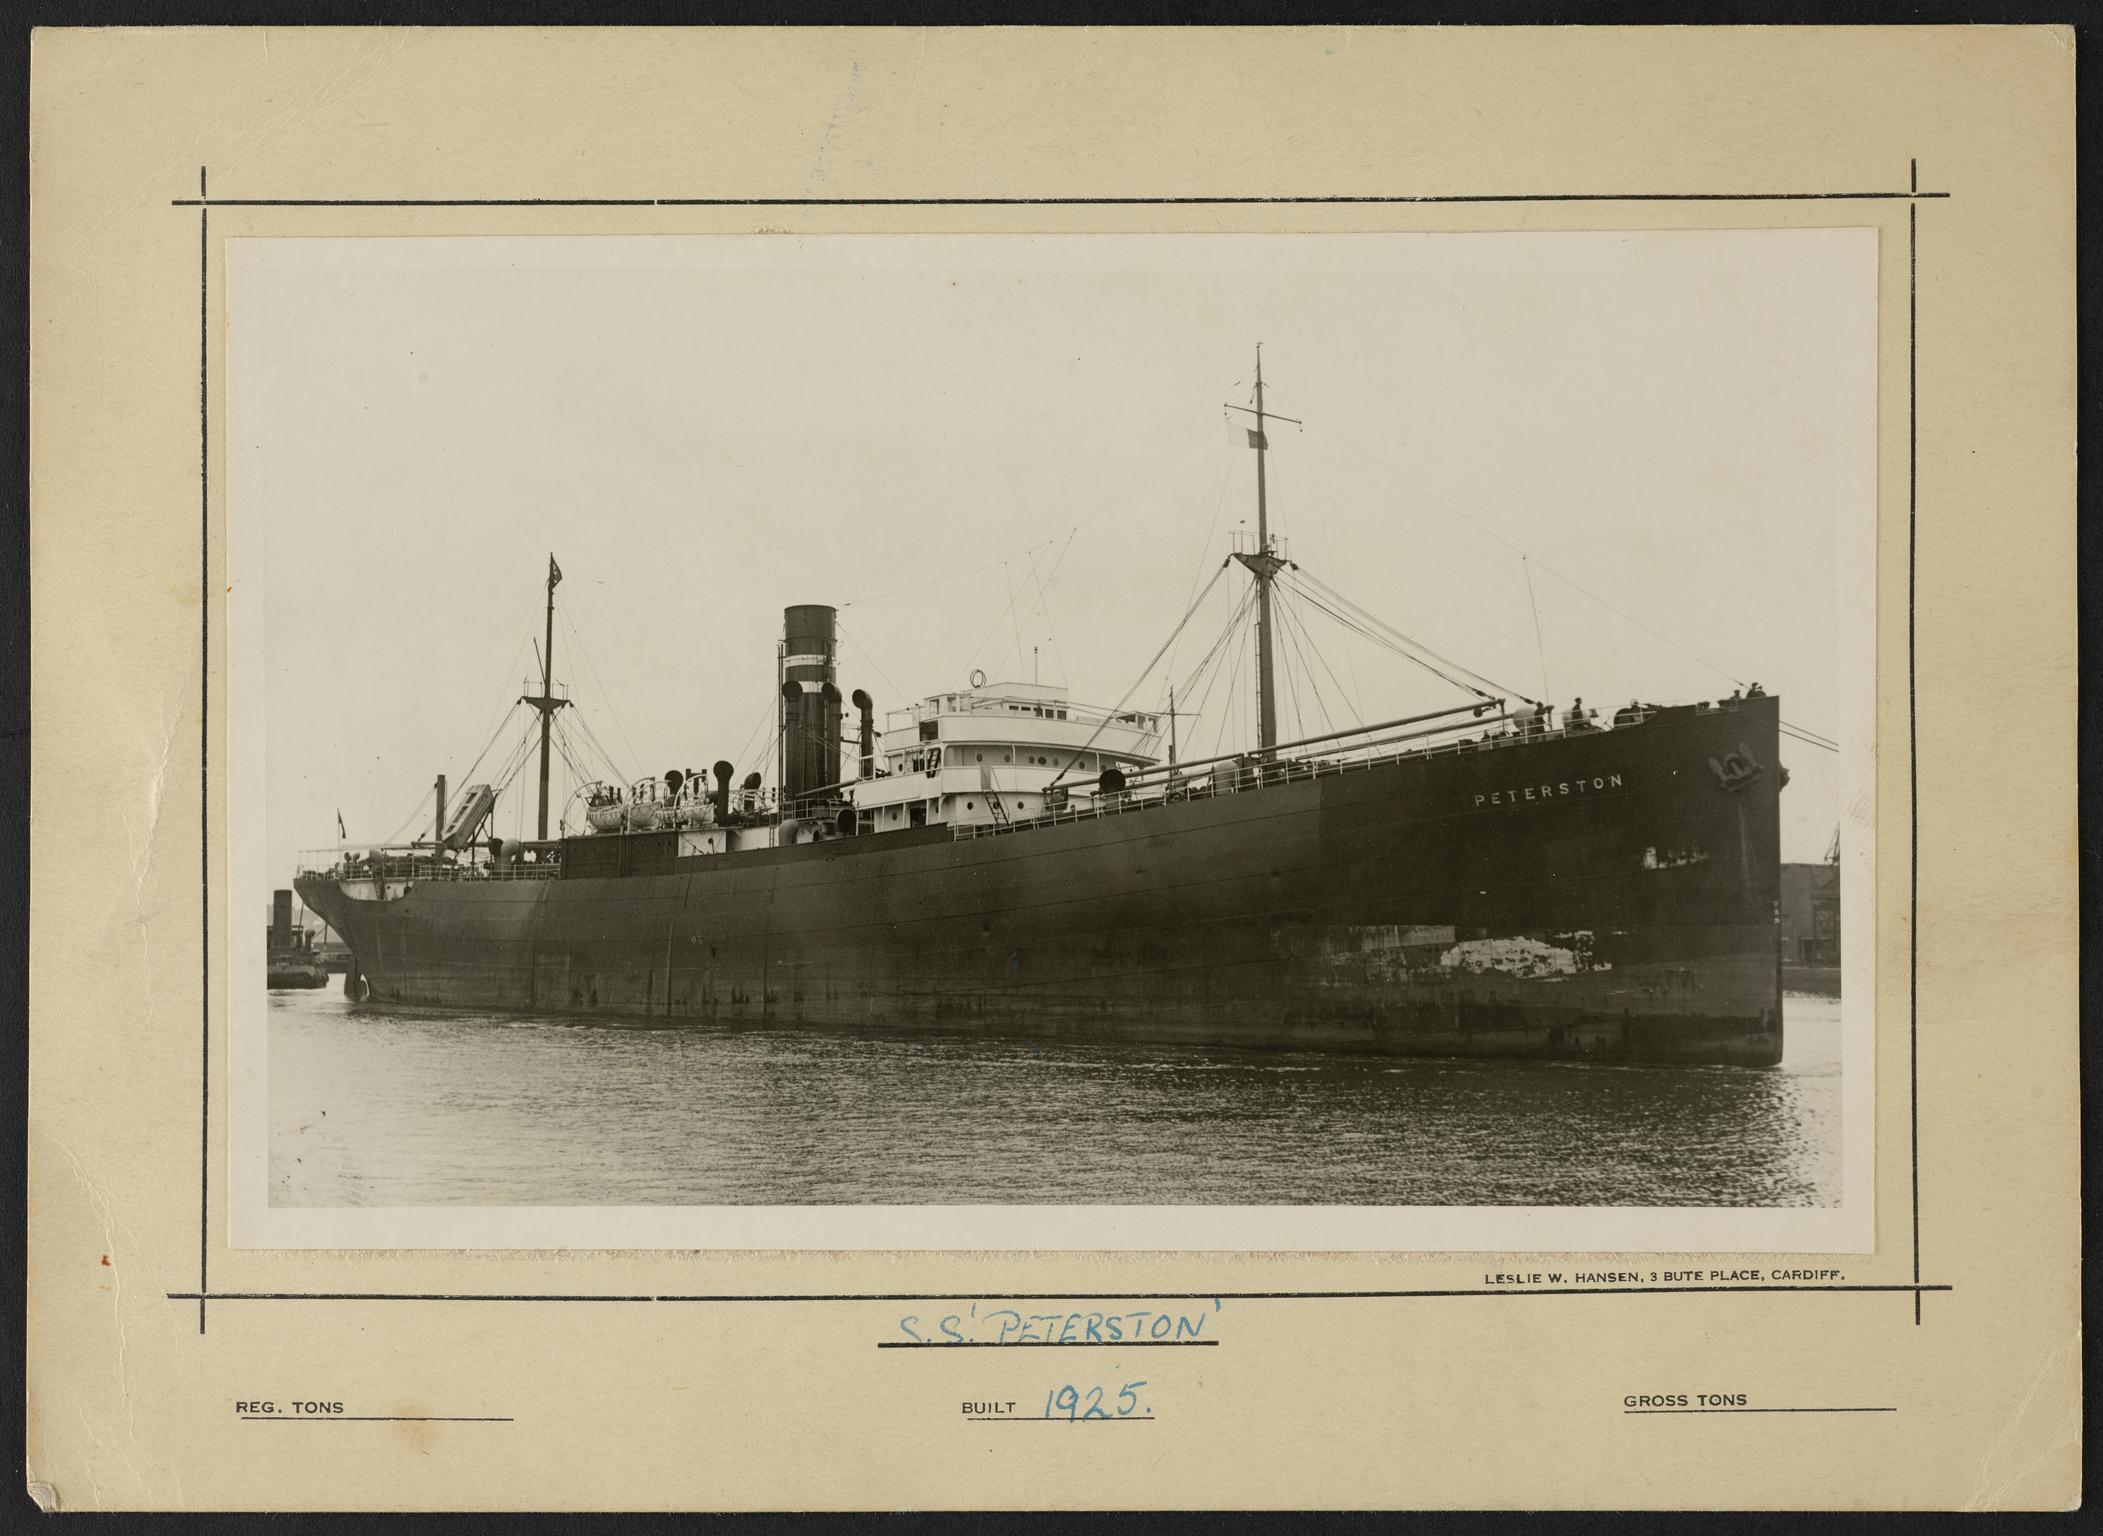 S.S. PETERSTON, photograph